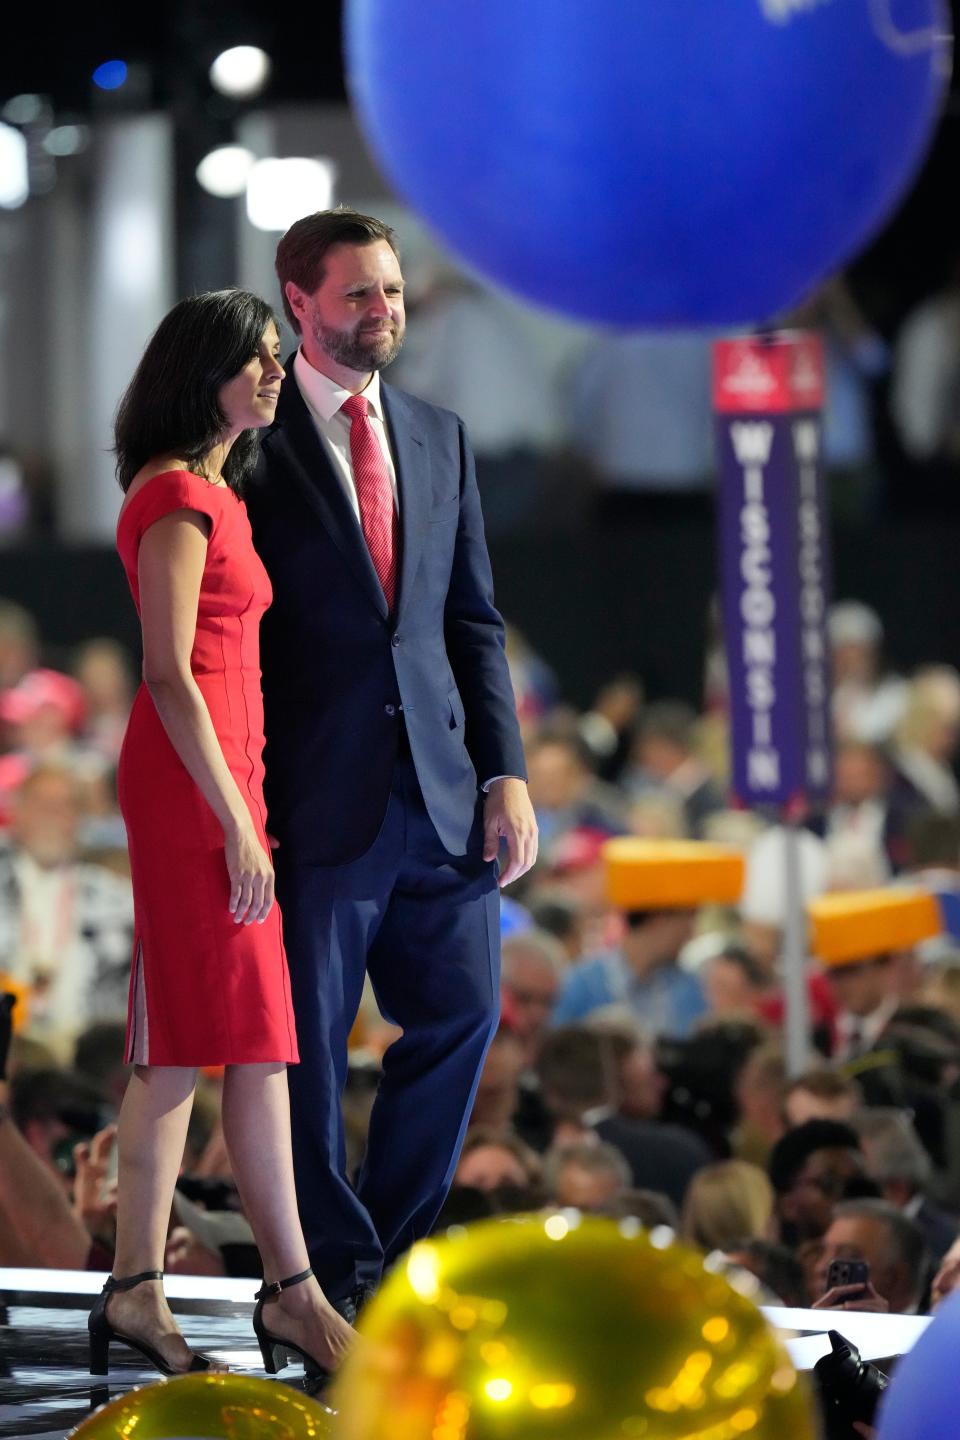 JD Vance and his wife, Usha Chilukuri Vance, stand on stage during a balloon drop on final day of the Republican National Convention in Milwaukee.